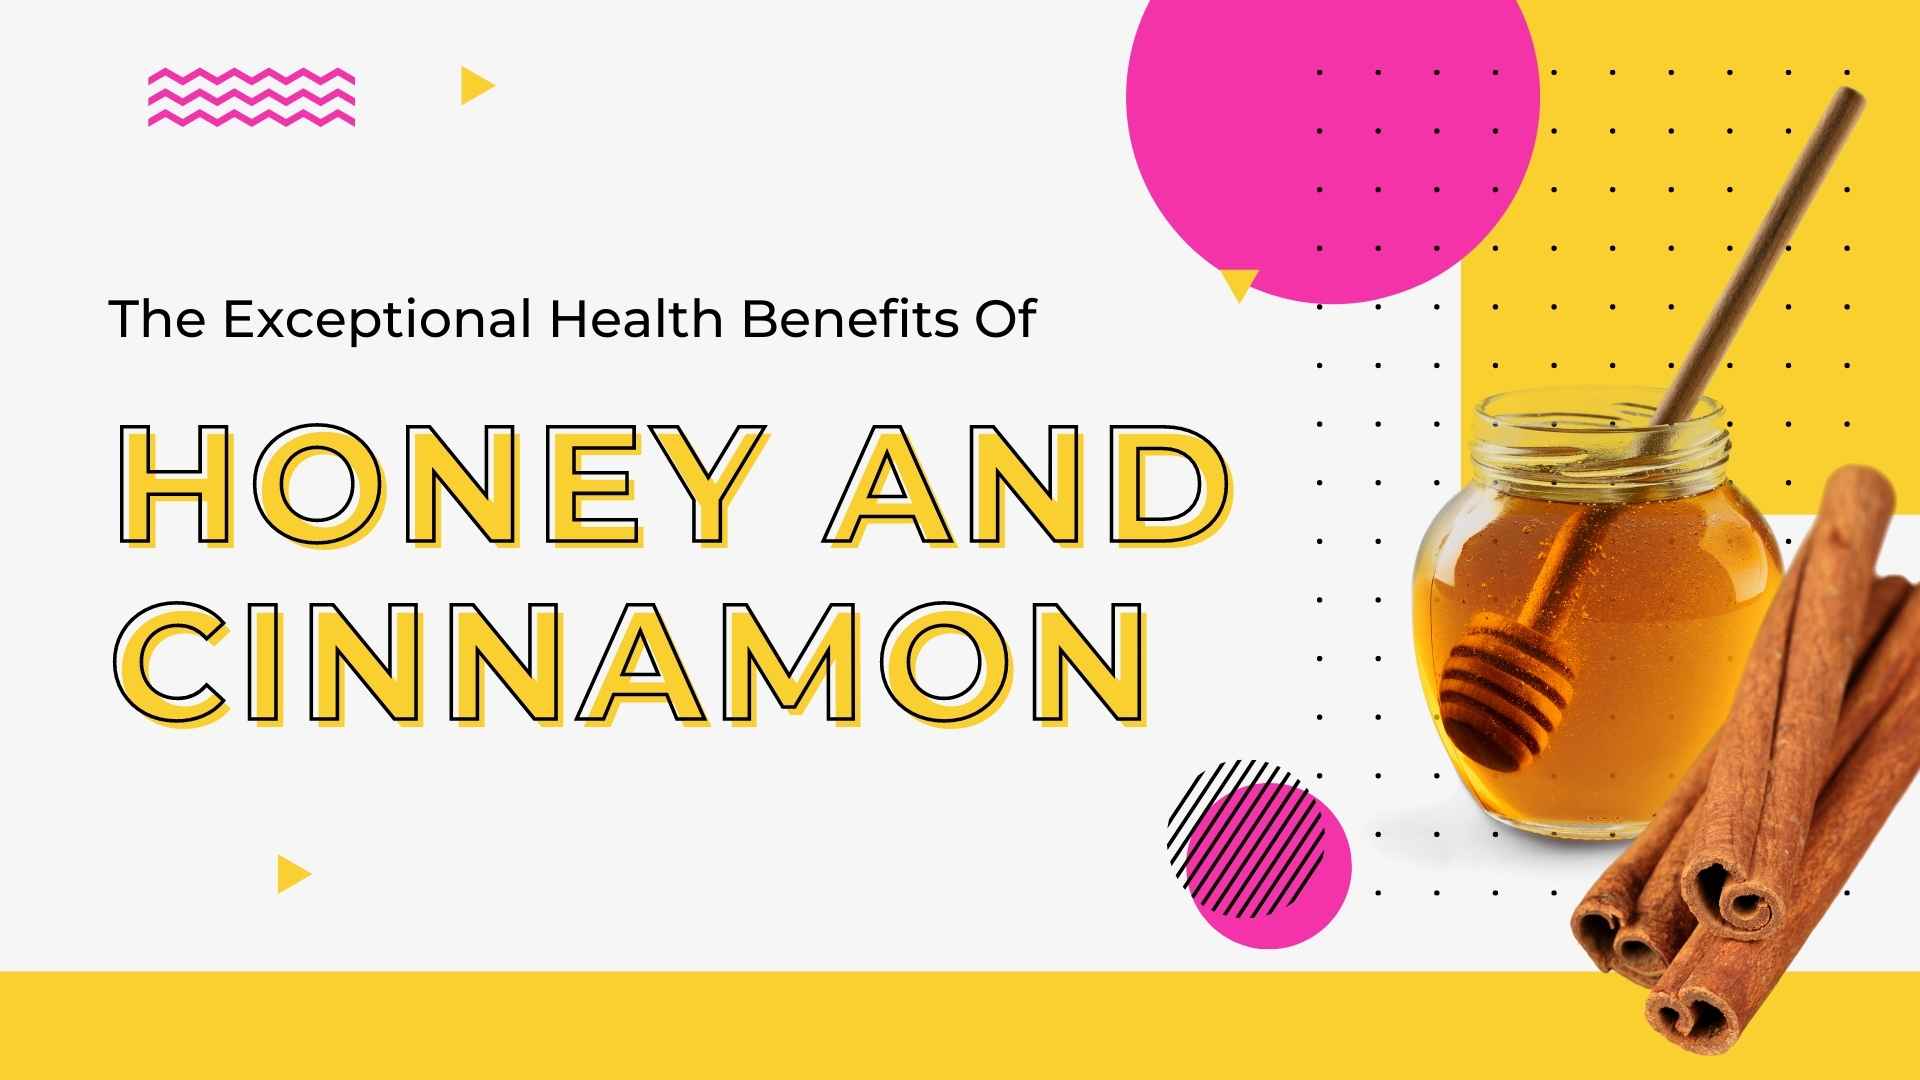 The Exceptional Health Benefits Of Honey And Cinnamon